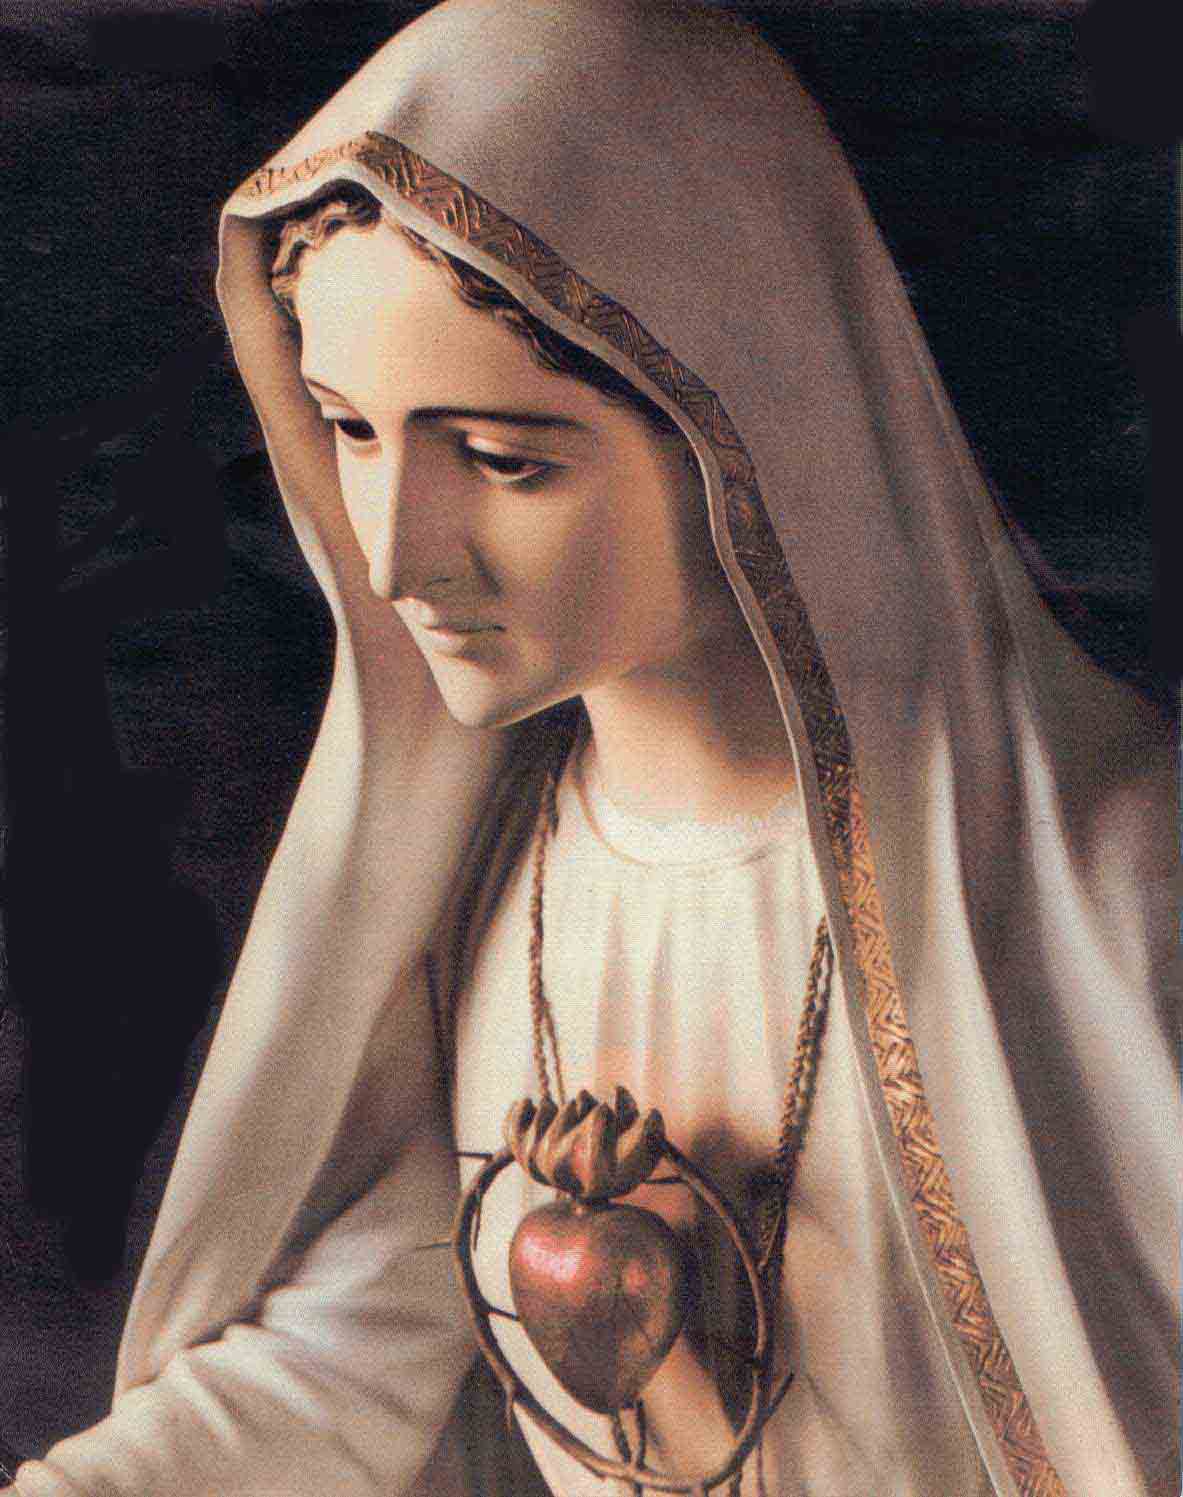 Post your favorite picture of the Blessed Virgin Mary!